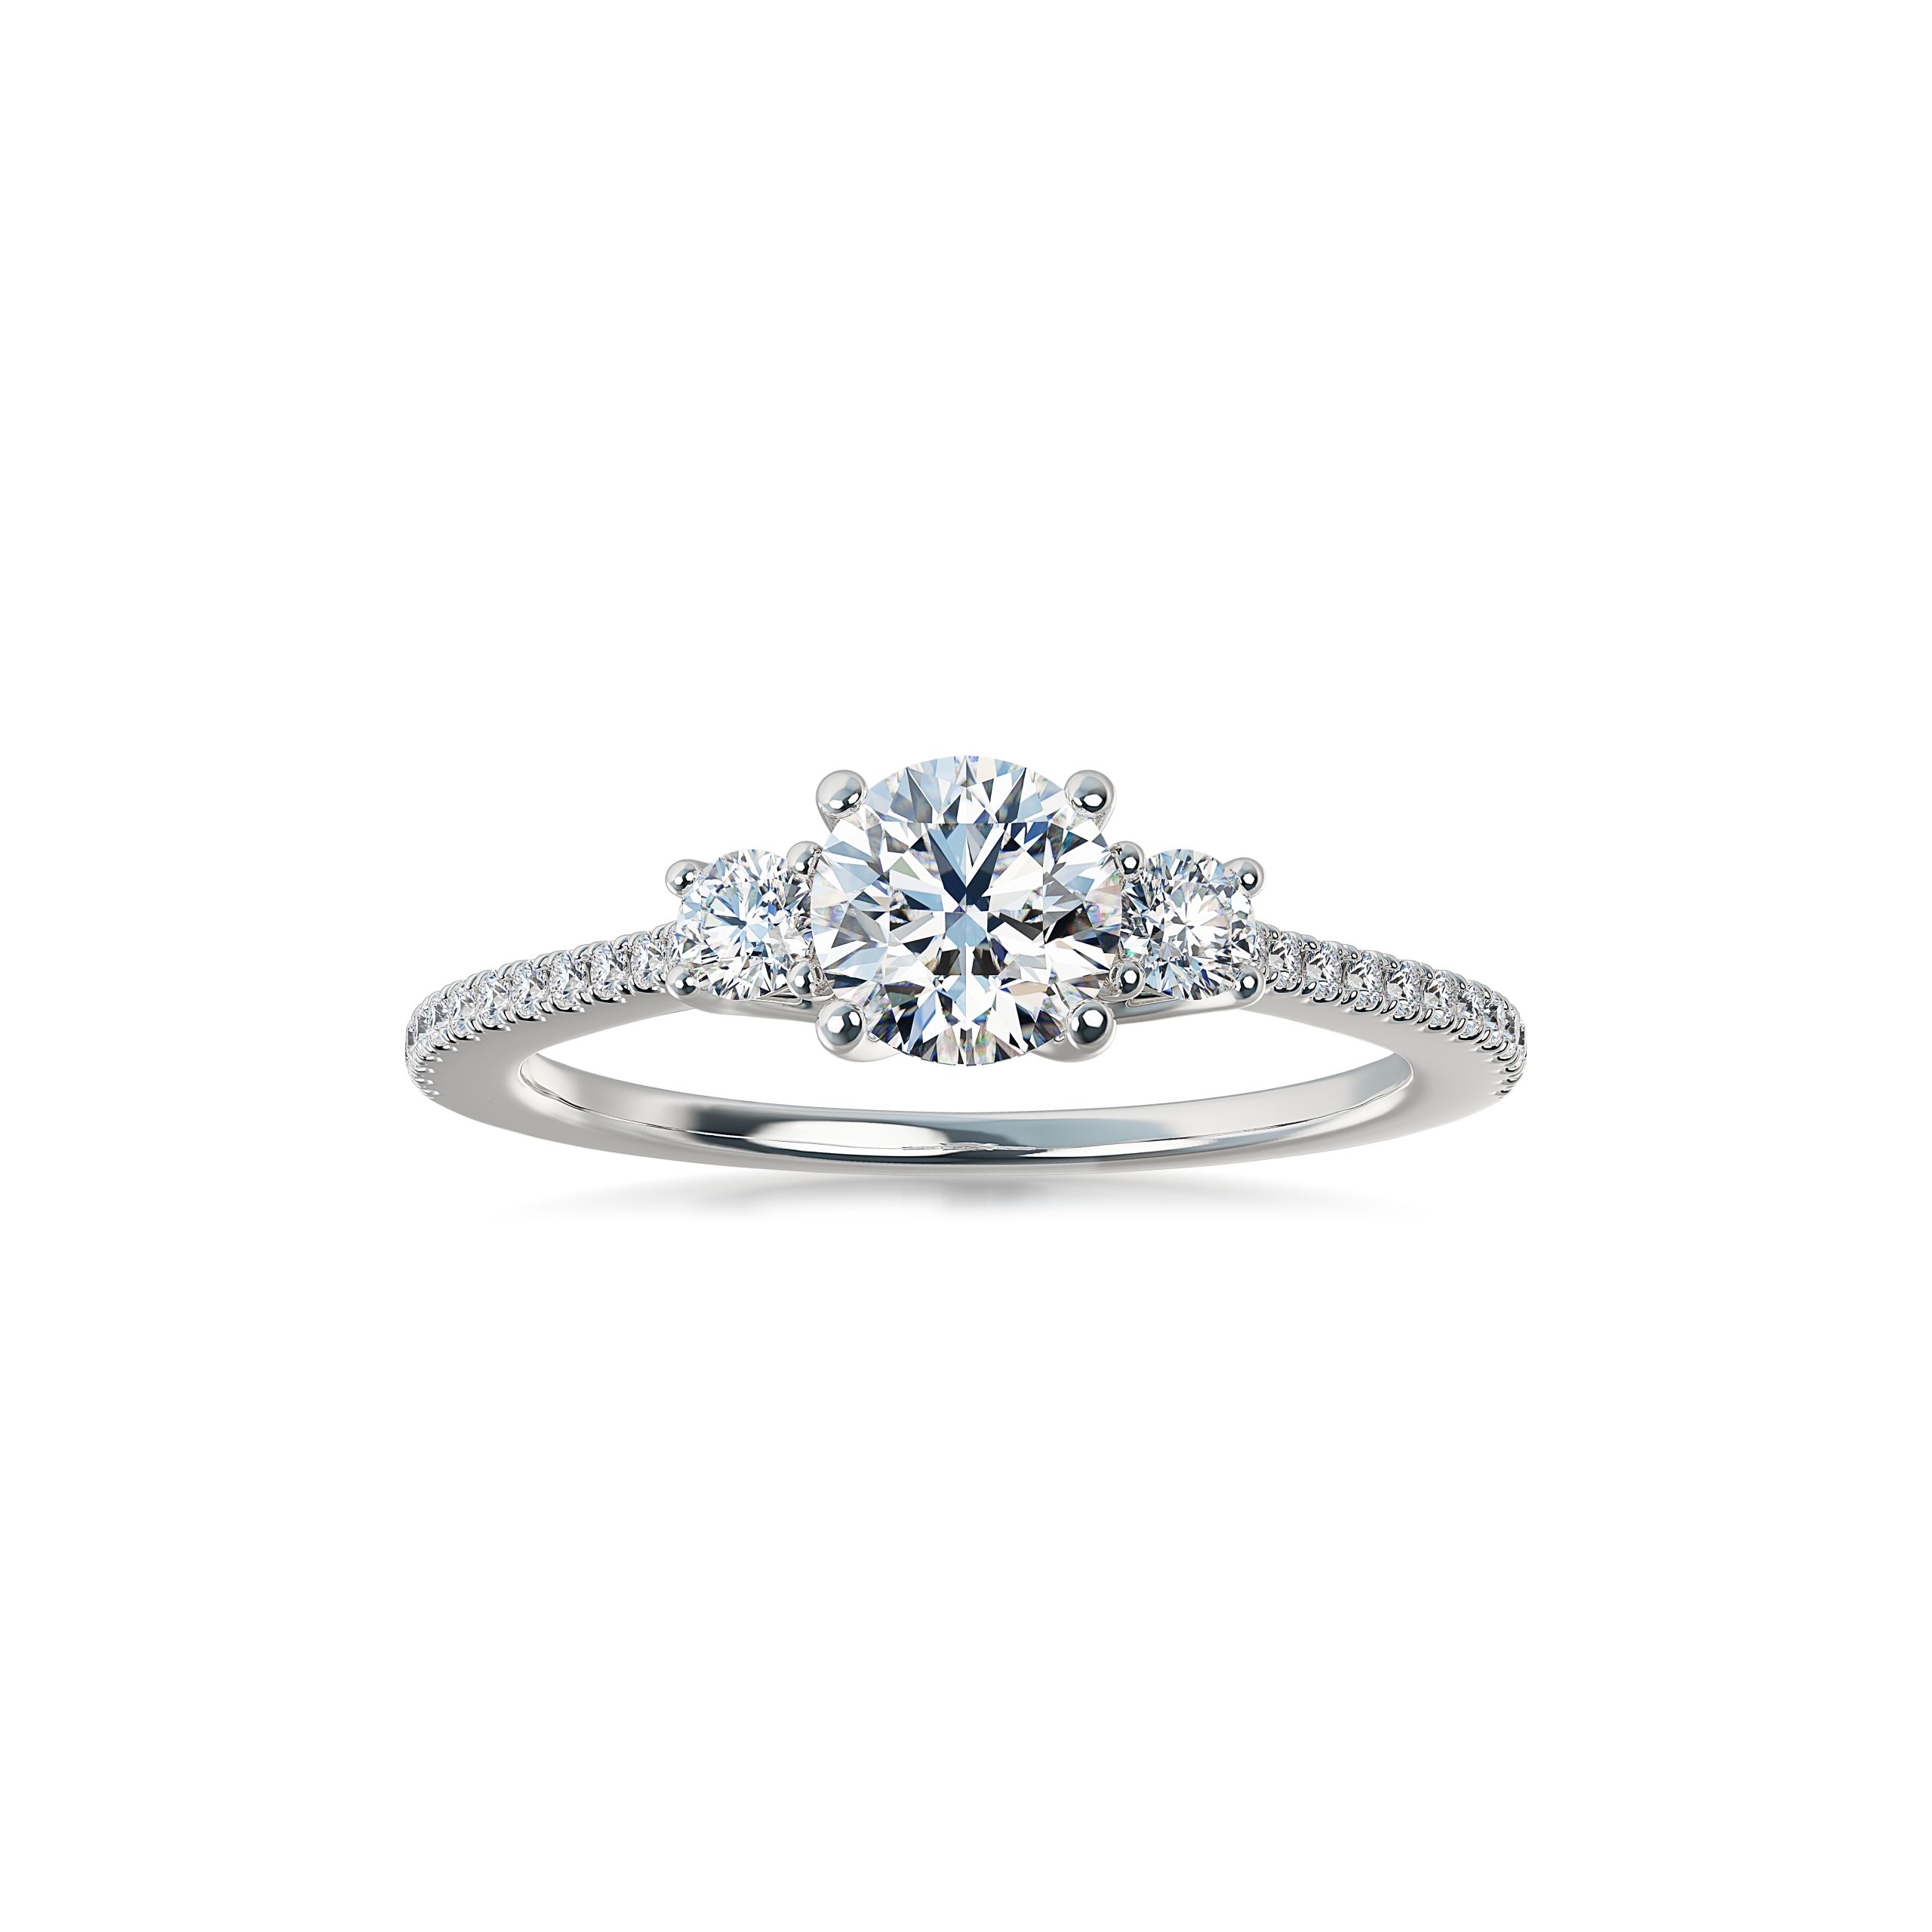 H Diamond Engagement Ring | Harry Ritchie's